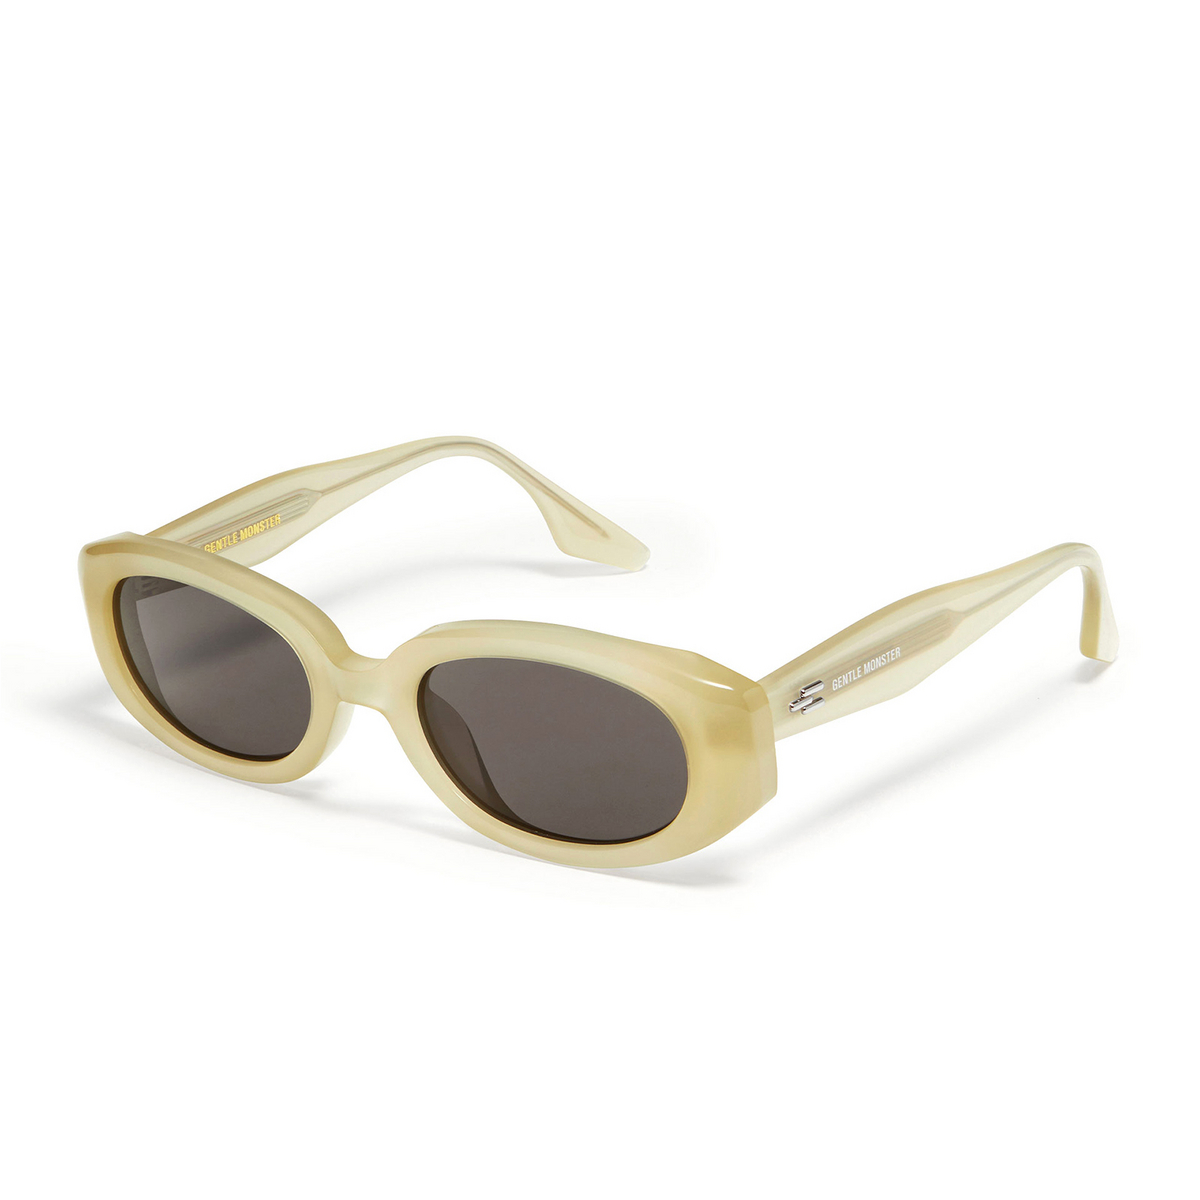 Gentle Monster® Oval Sunglasses: Oto color Ivory IC1 - three-quarters view.